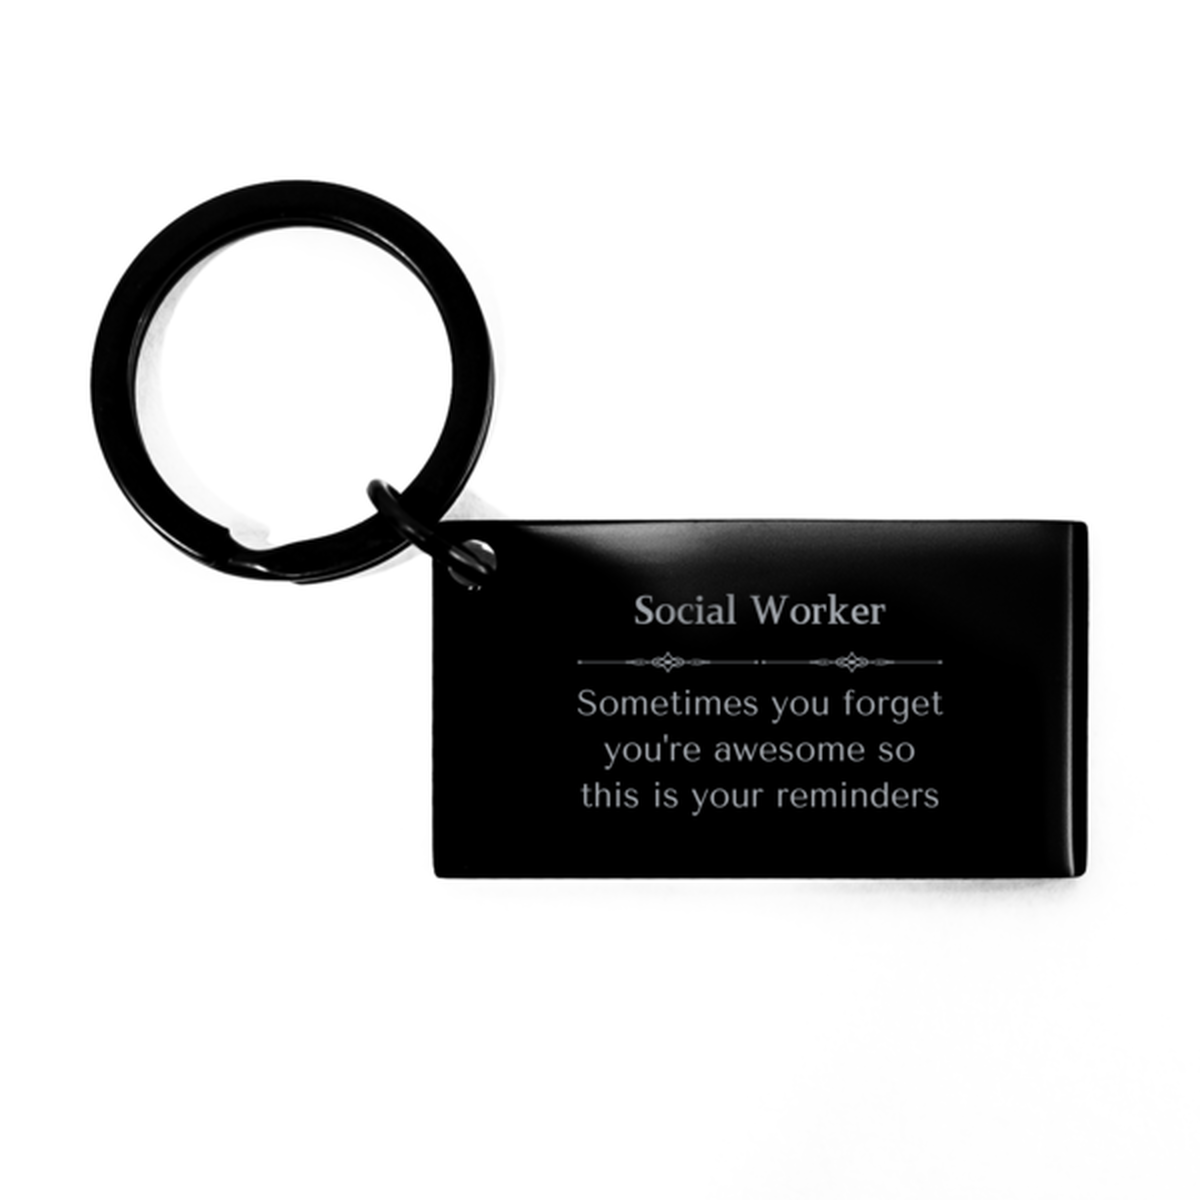 Sentimental Social Worker Keychain, Waiter Sometimes you forget you're awesome so this is your reminders, Graduation Christmas Birthday Gifts for Social Worker, Men, Women, Coworkers